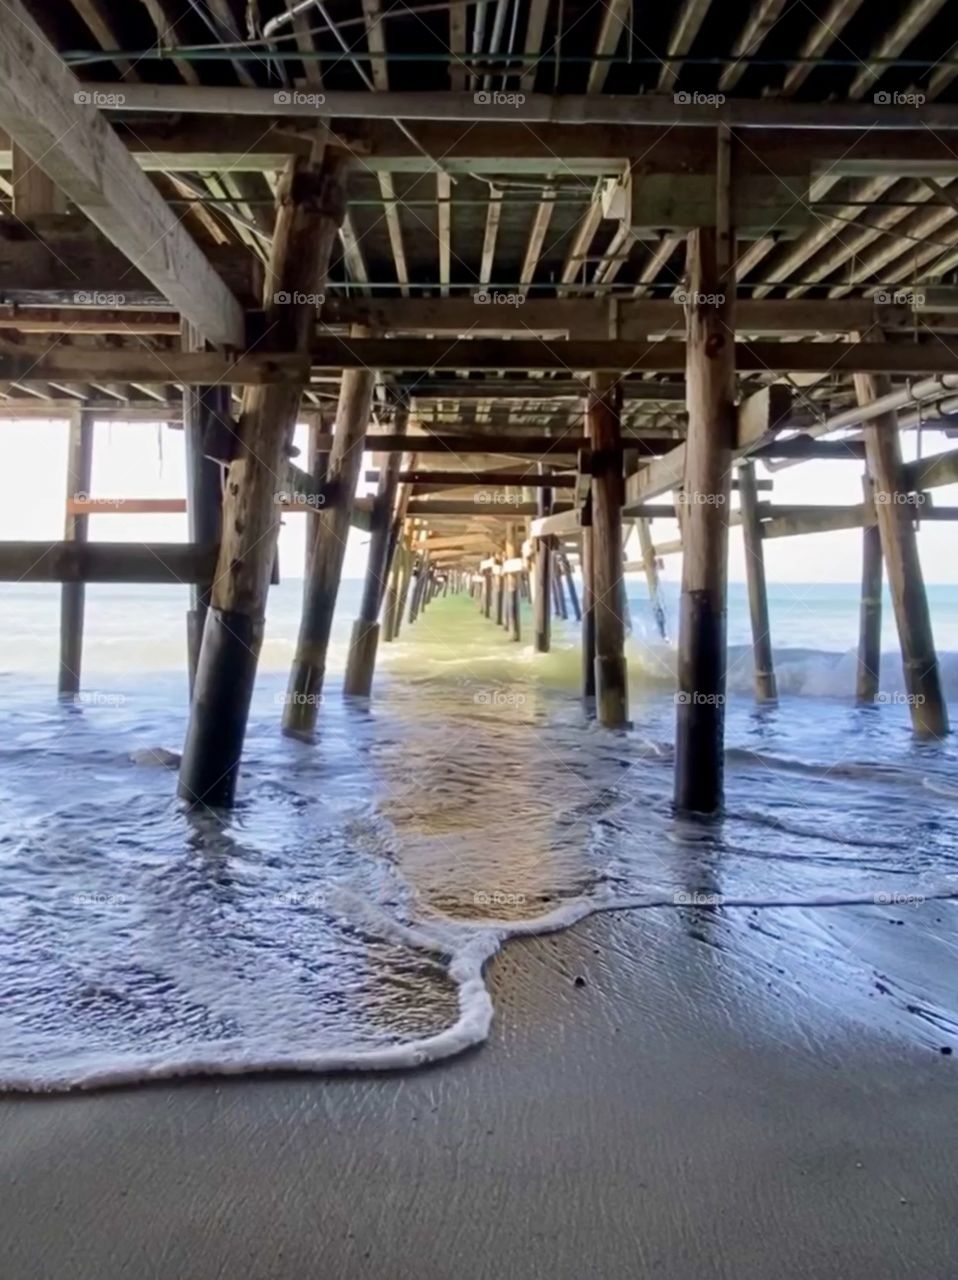 I Took It With My IPhone 11 Max Pro Foap Mission! Under The Pier!